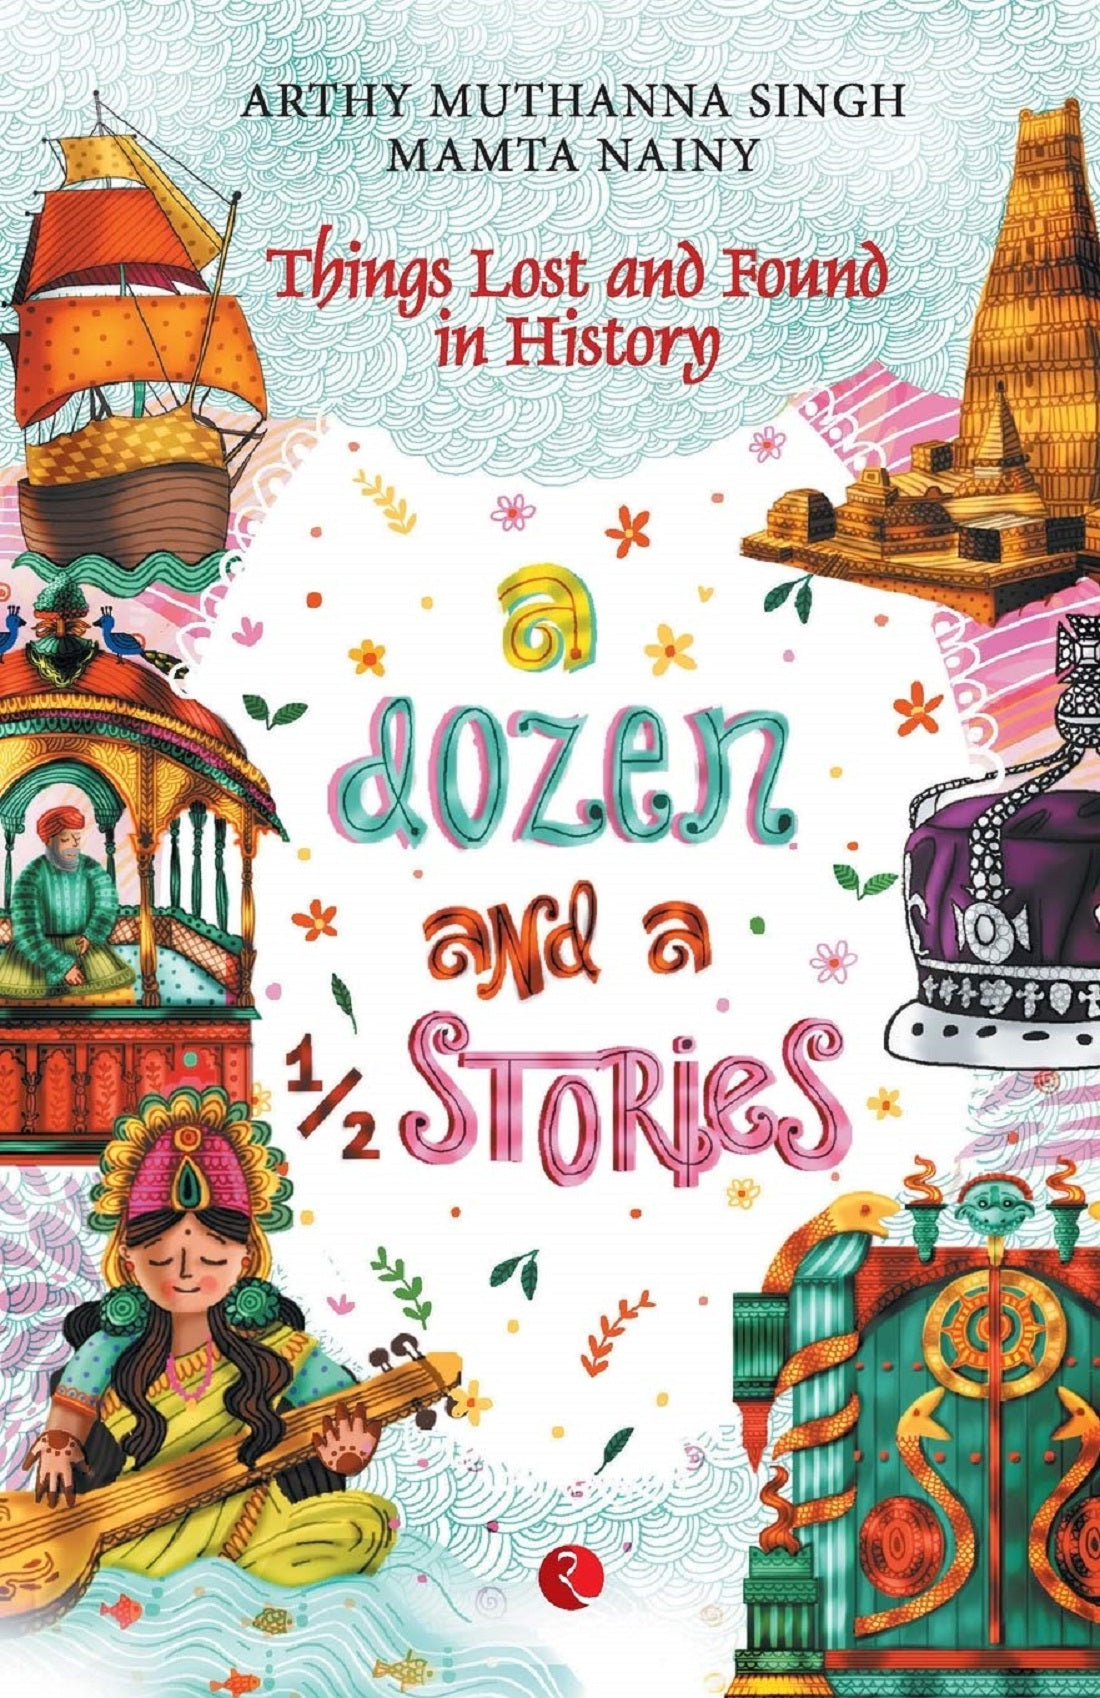 THINGS LOST AND FOUND IN HISTORY - A DOZEN AND A HALF STORIES